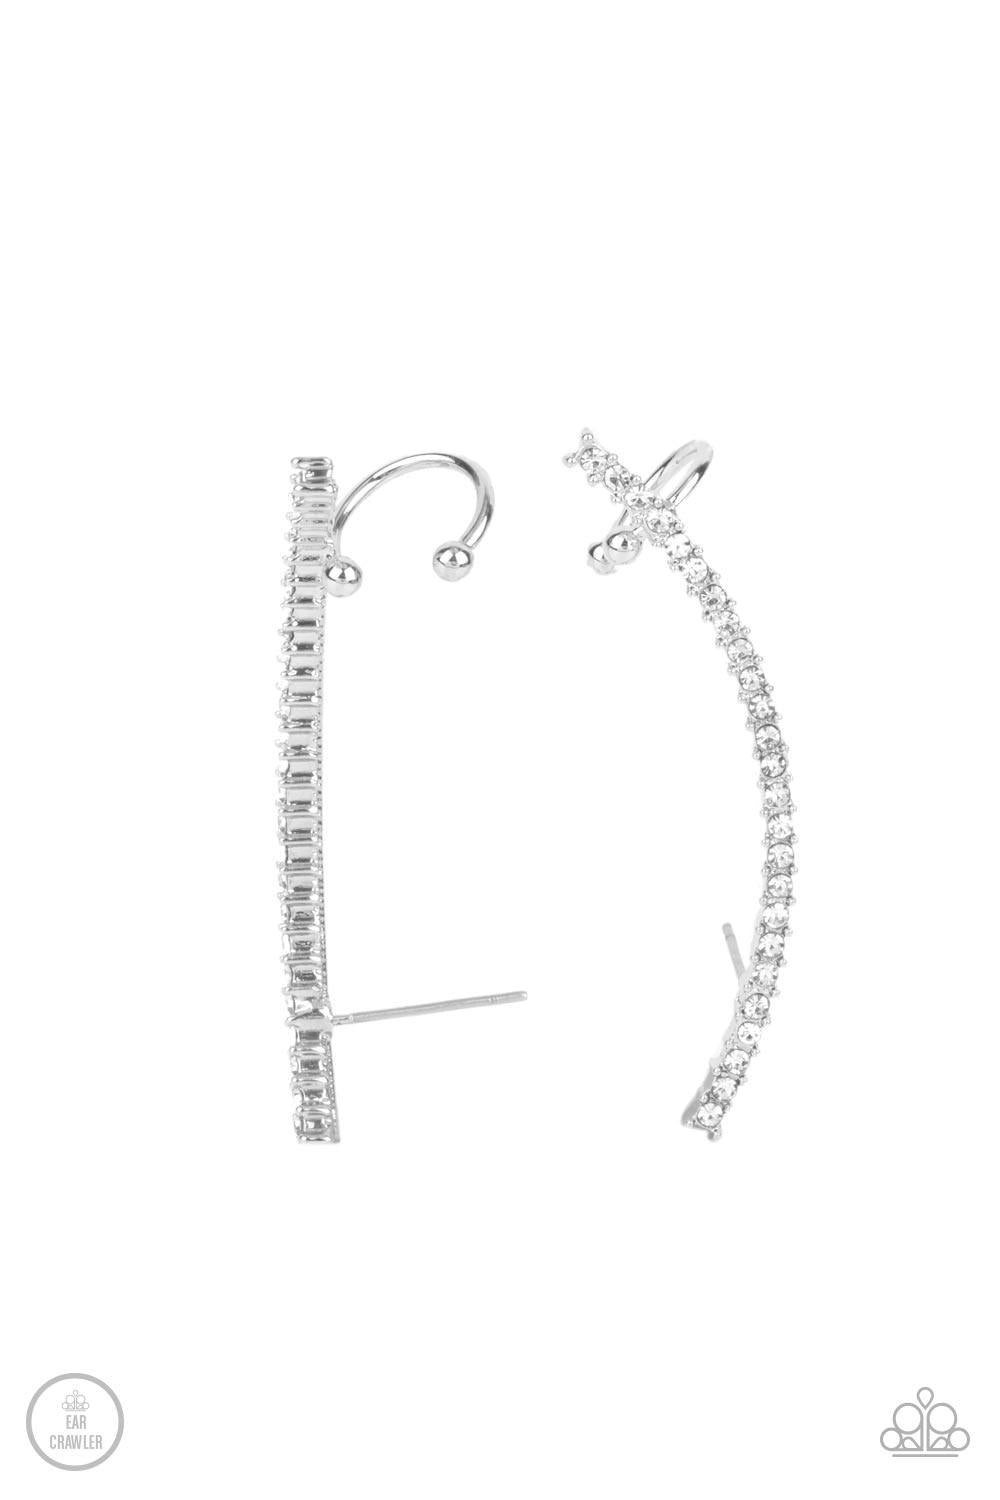 Paparazzi Accessories Sleekly Shimmering - White Featuring pronged silver fittings, a dainty row of stacked white rhinestones gently curves as it climbs the ear for a flawless fashion. Features a dainty cuff attached to the top for a secure fit. Sold as o